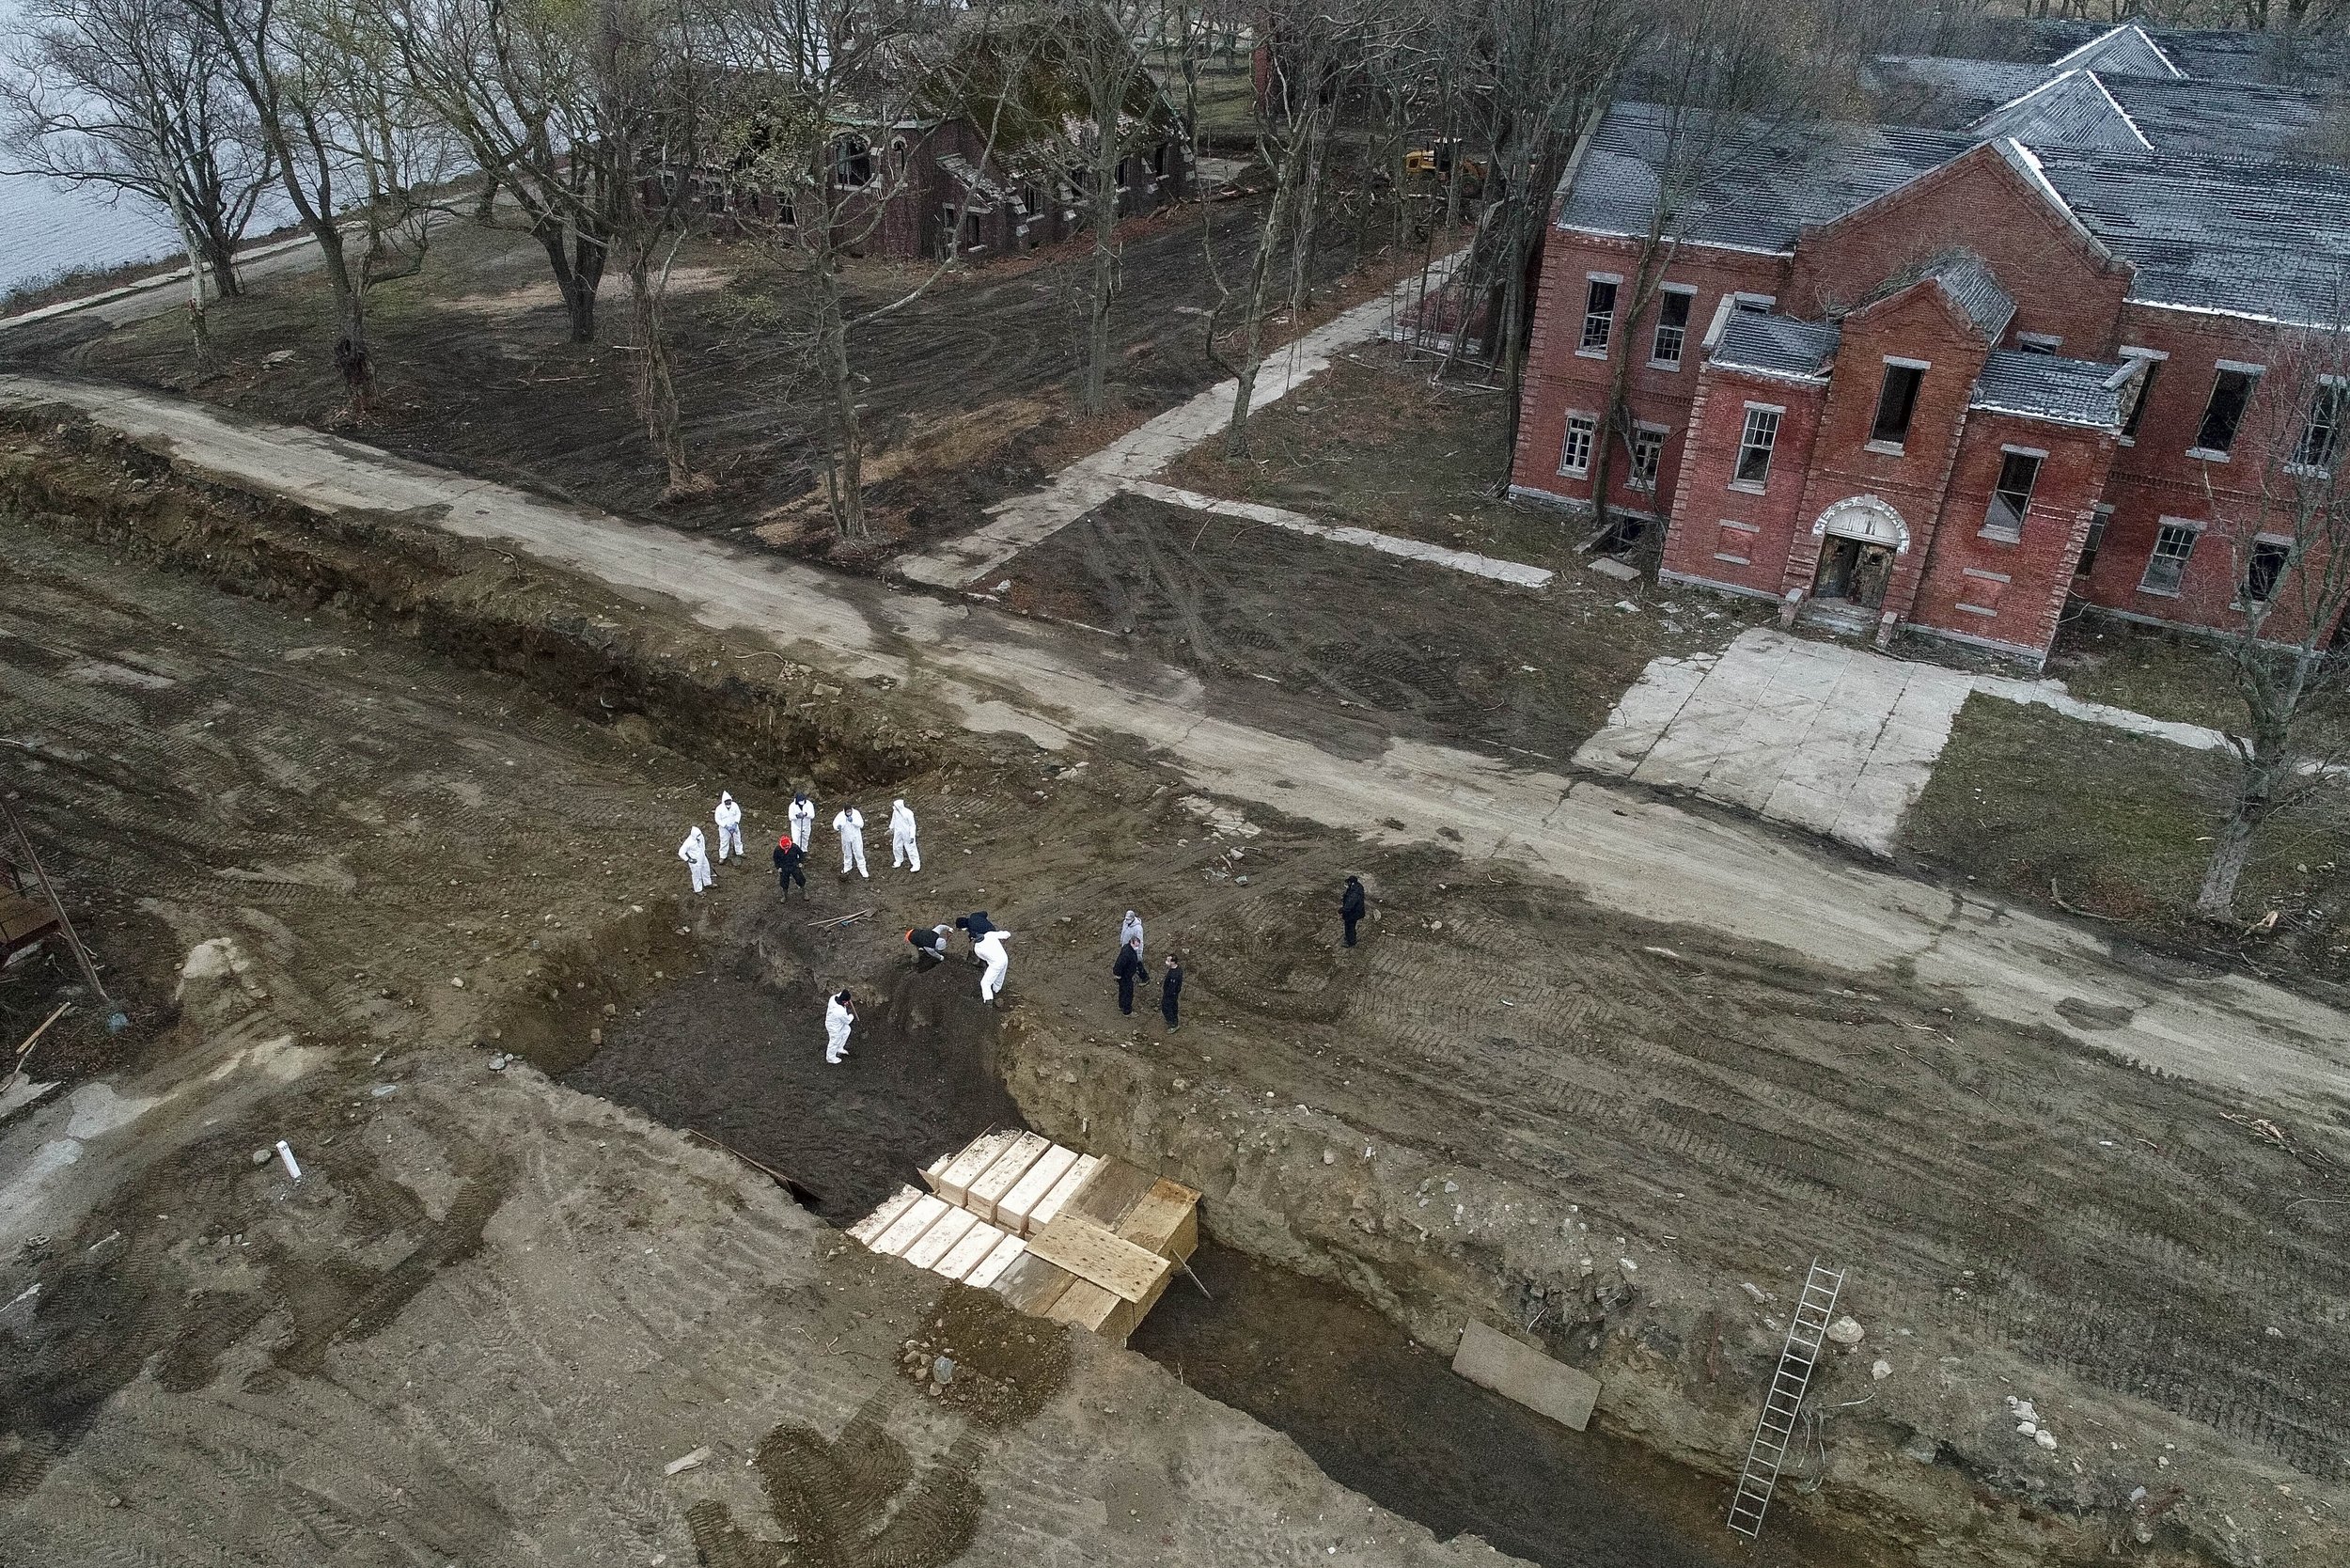  Workers wearing personal protective equipment bury bodies in a trench on Hart Island, Thursday, April 9, 2020, in the Bronx borough of New York. (AP Photo/John Minchillo) 